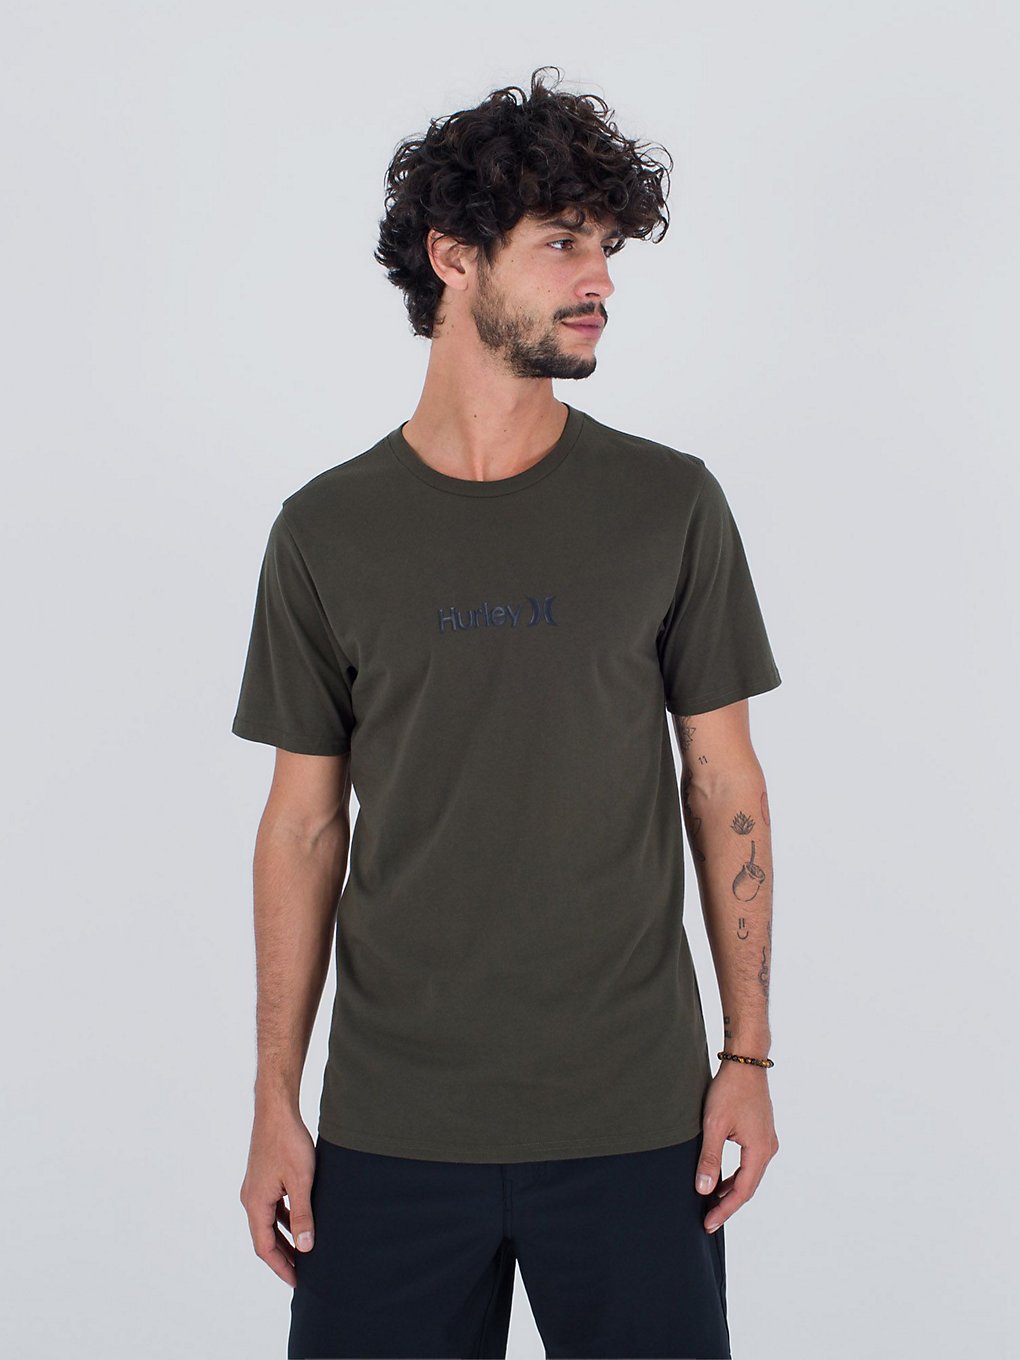 hurley h20 dri one & only t-shirt cargo